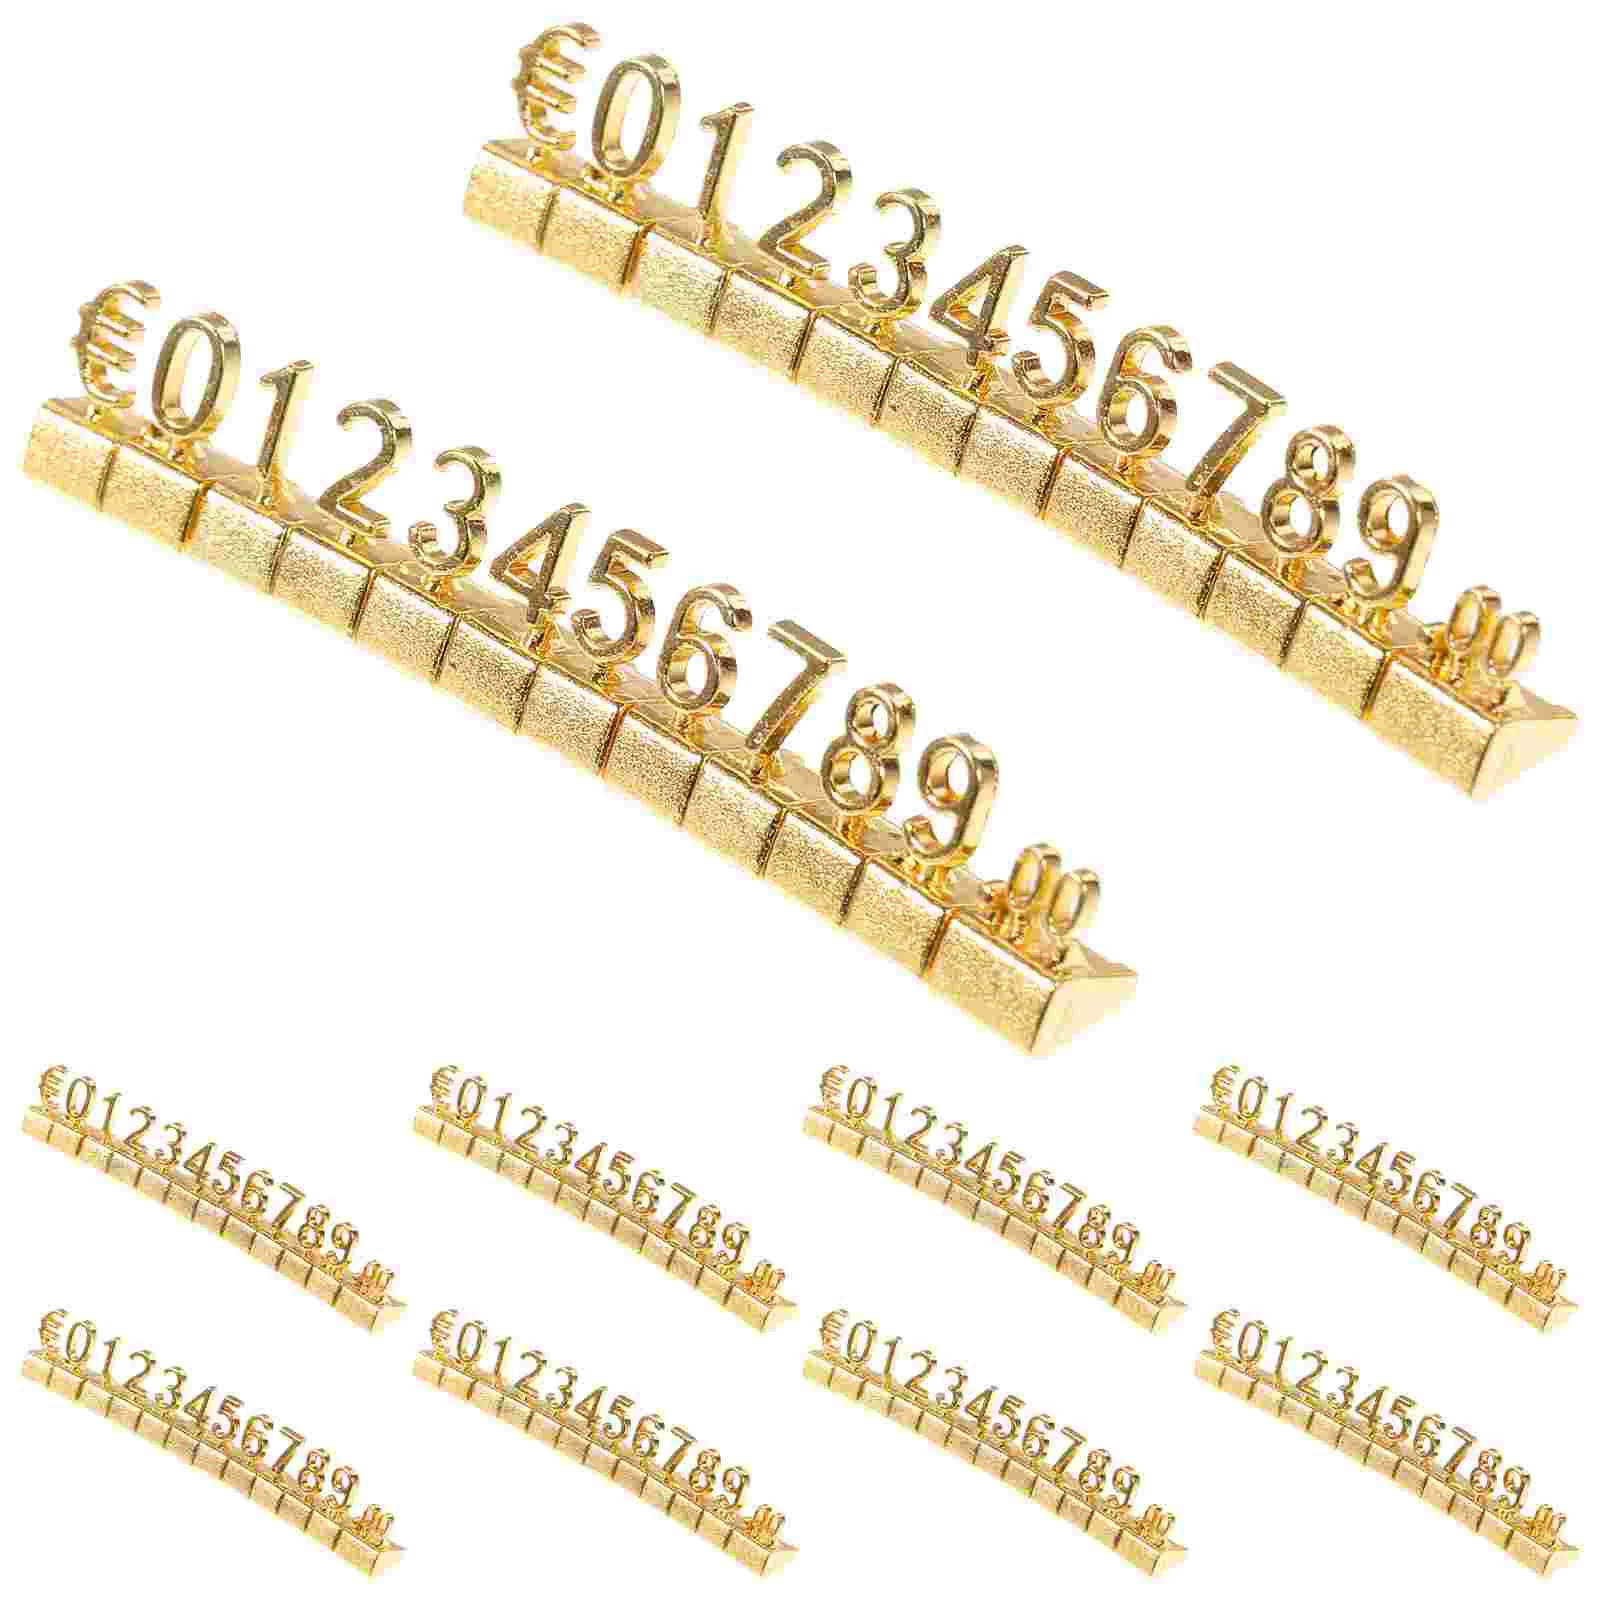 

10 Pcs Metal Price Tag Jewelry Display Cubes Signs Numbers Glod Shelf Signage Pricing Label Stand Block Alloy Stickers